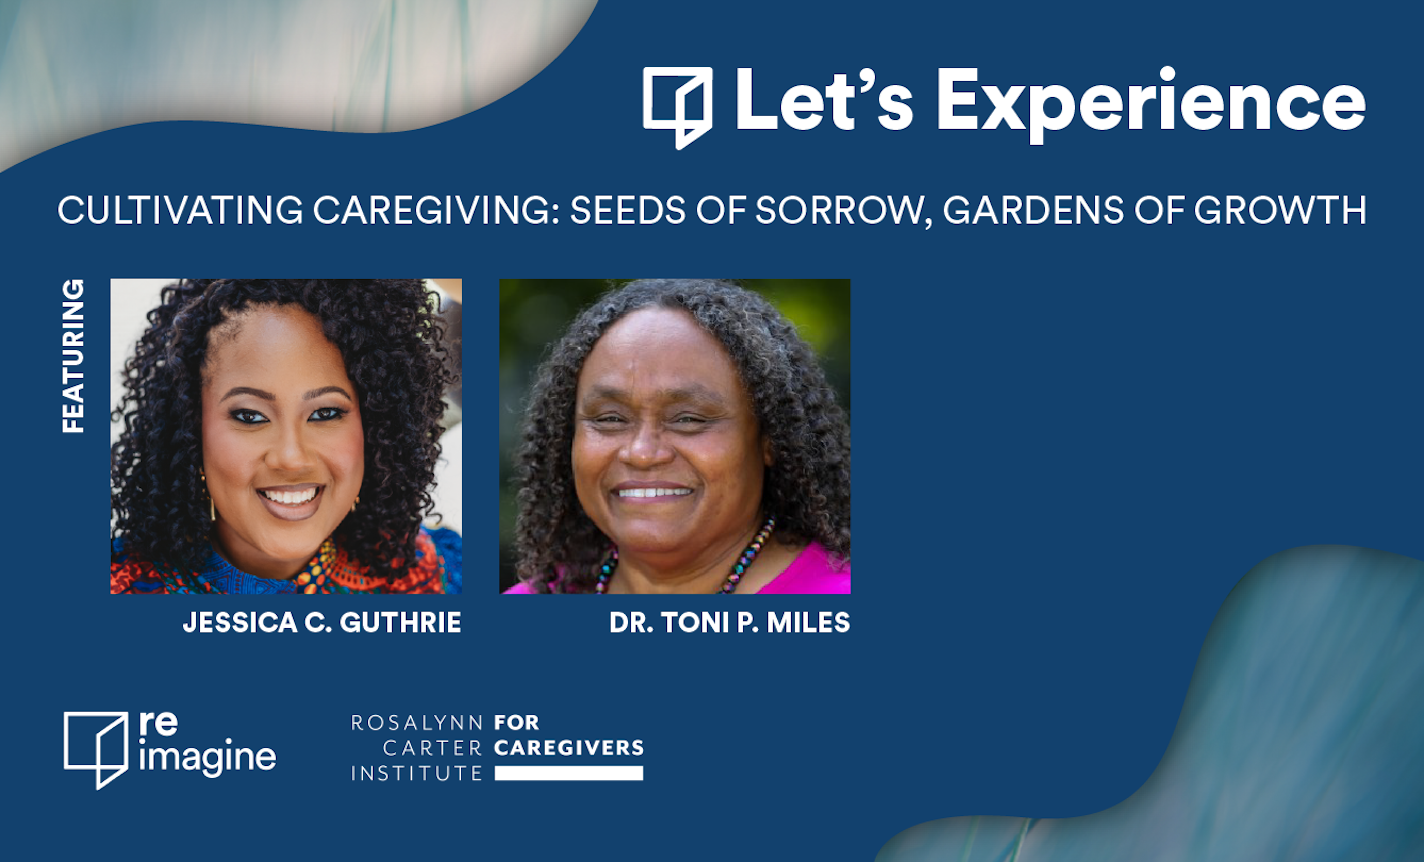 Let’s Experience: So You’re a Caregiver, Now What?